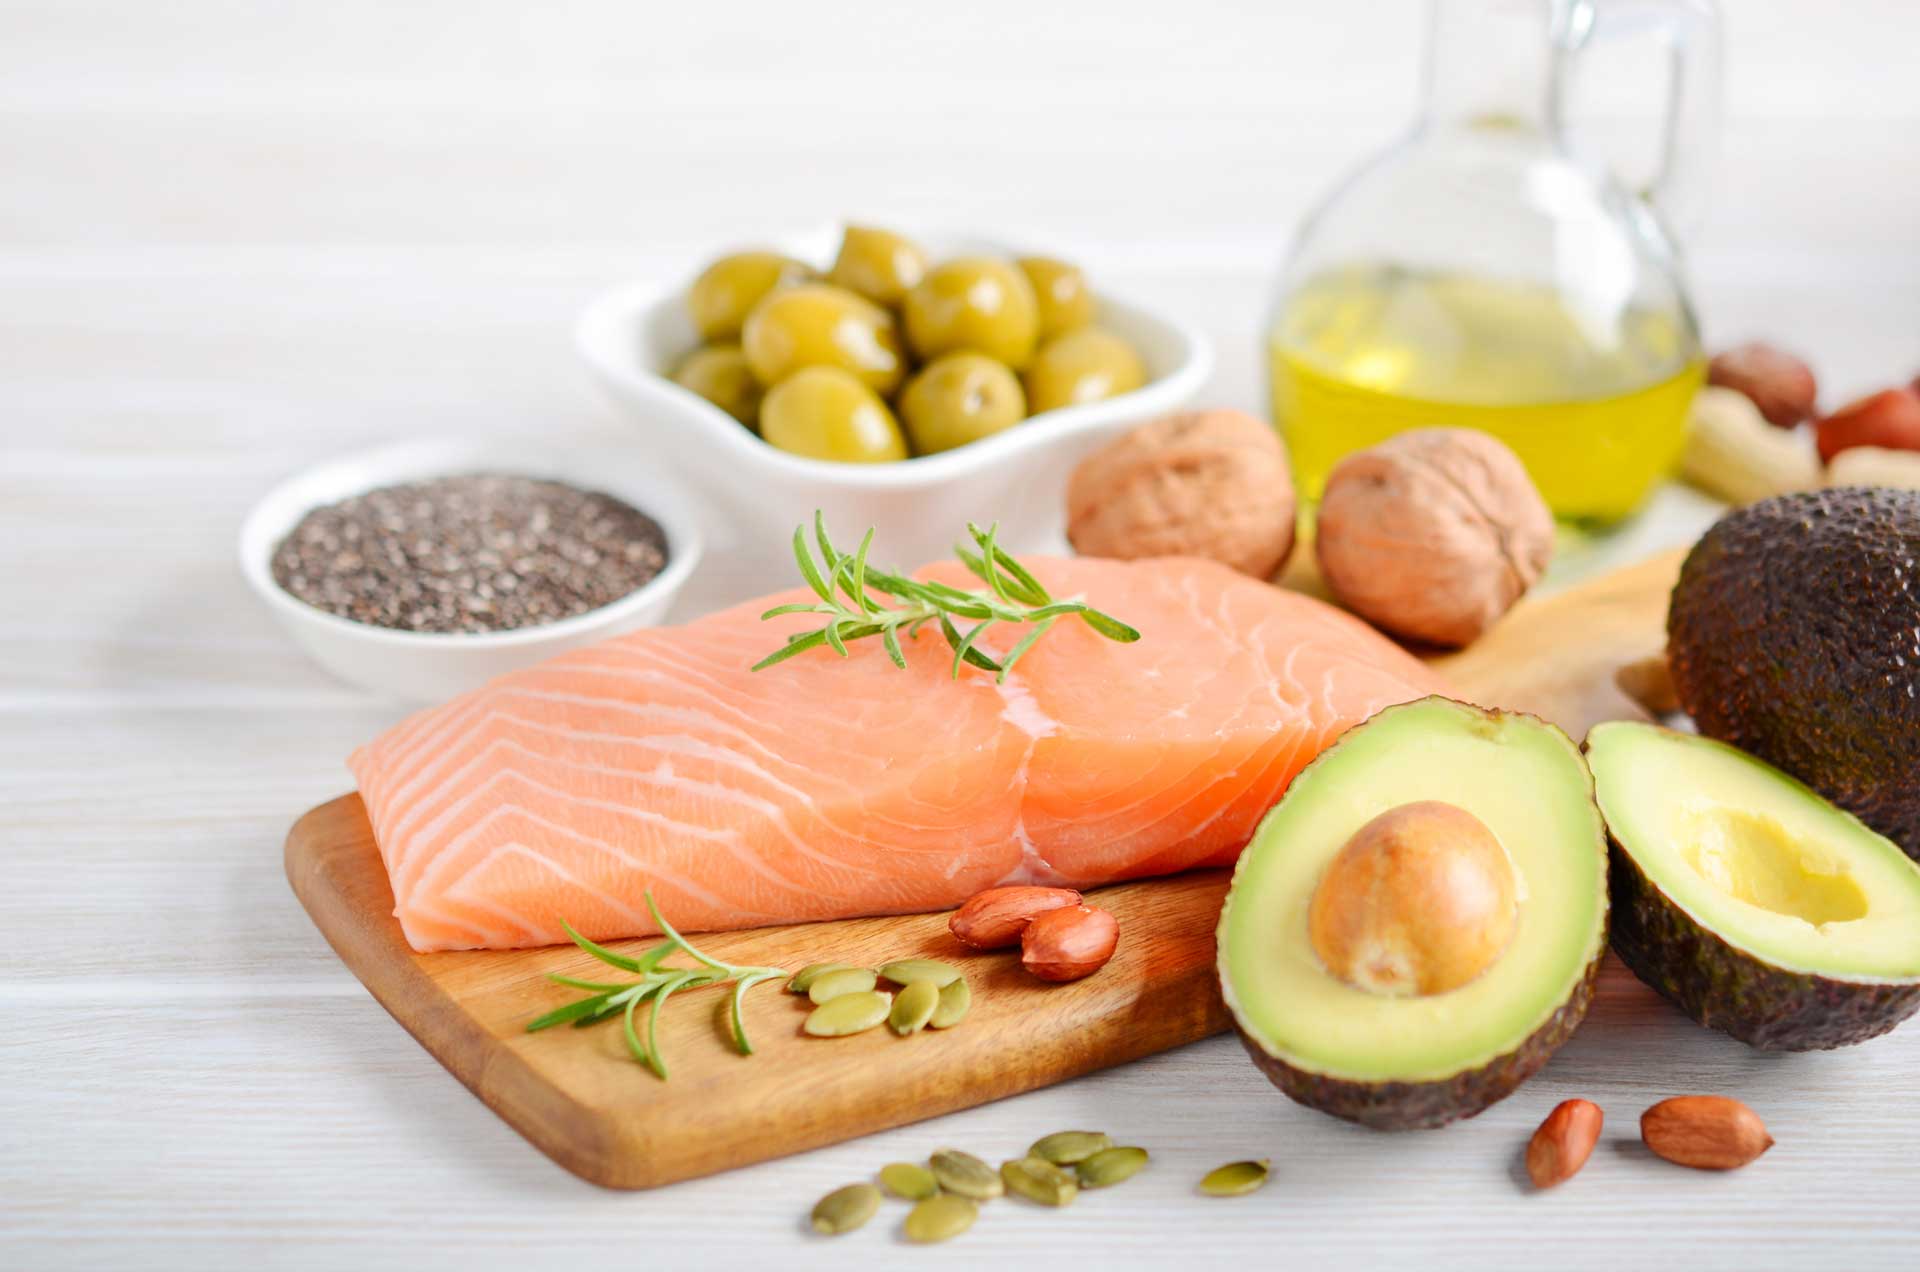 Types of Fats: Understanding the Difference